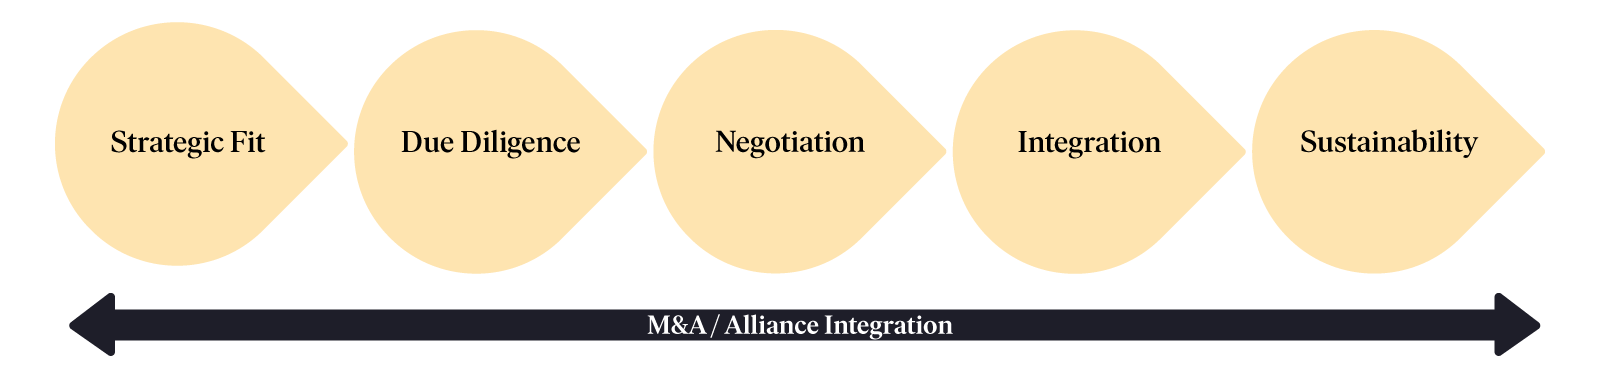 The phases of M&A and alliances are strategic fit, due diligence, negotiation, integration, and sustainability.